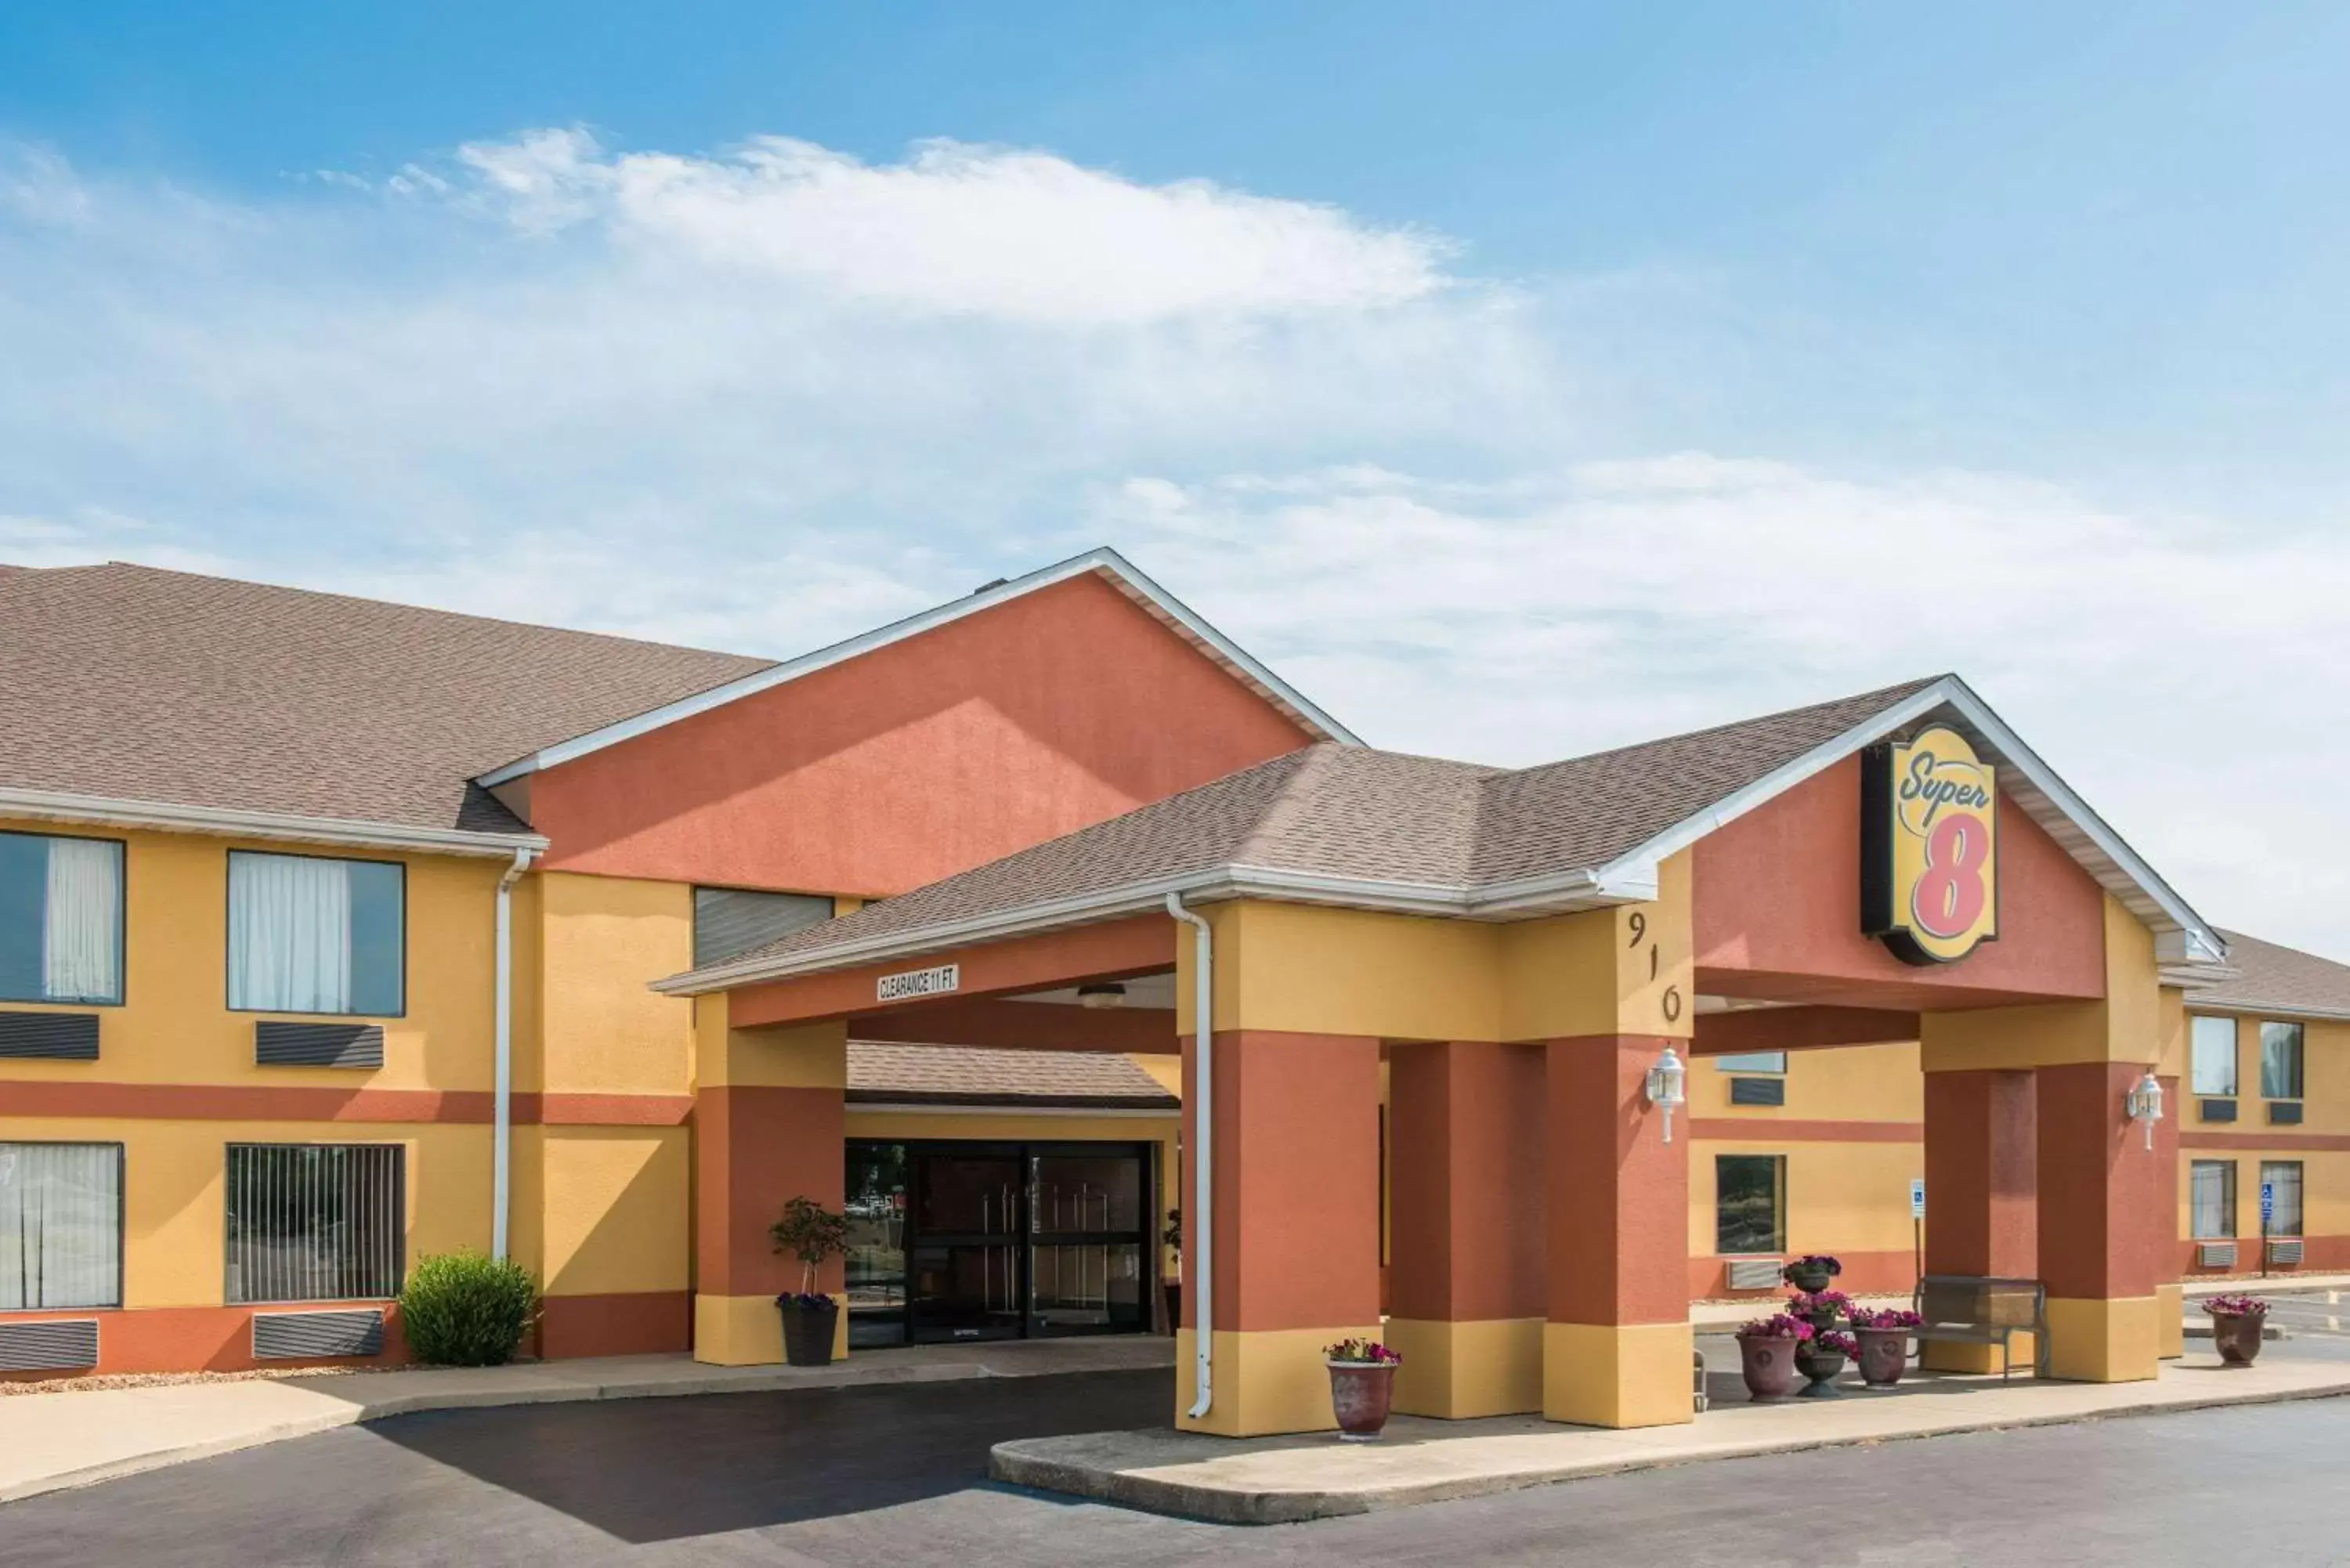 Property Building in Super 8 by Wyndham Troy IL/St. Louis Area